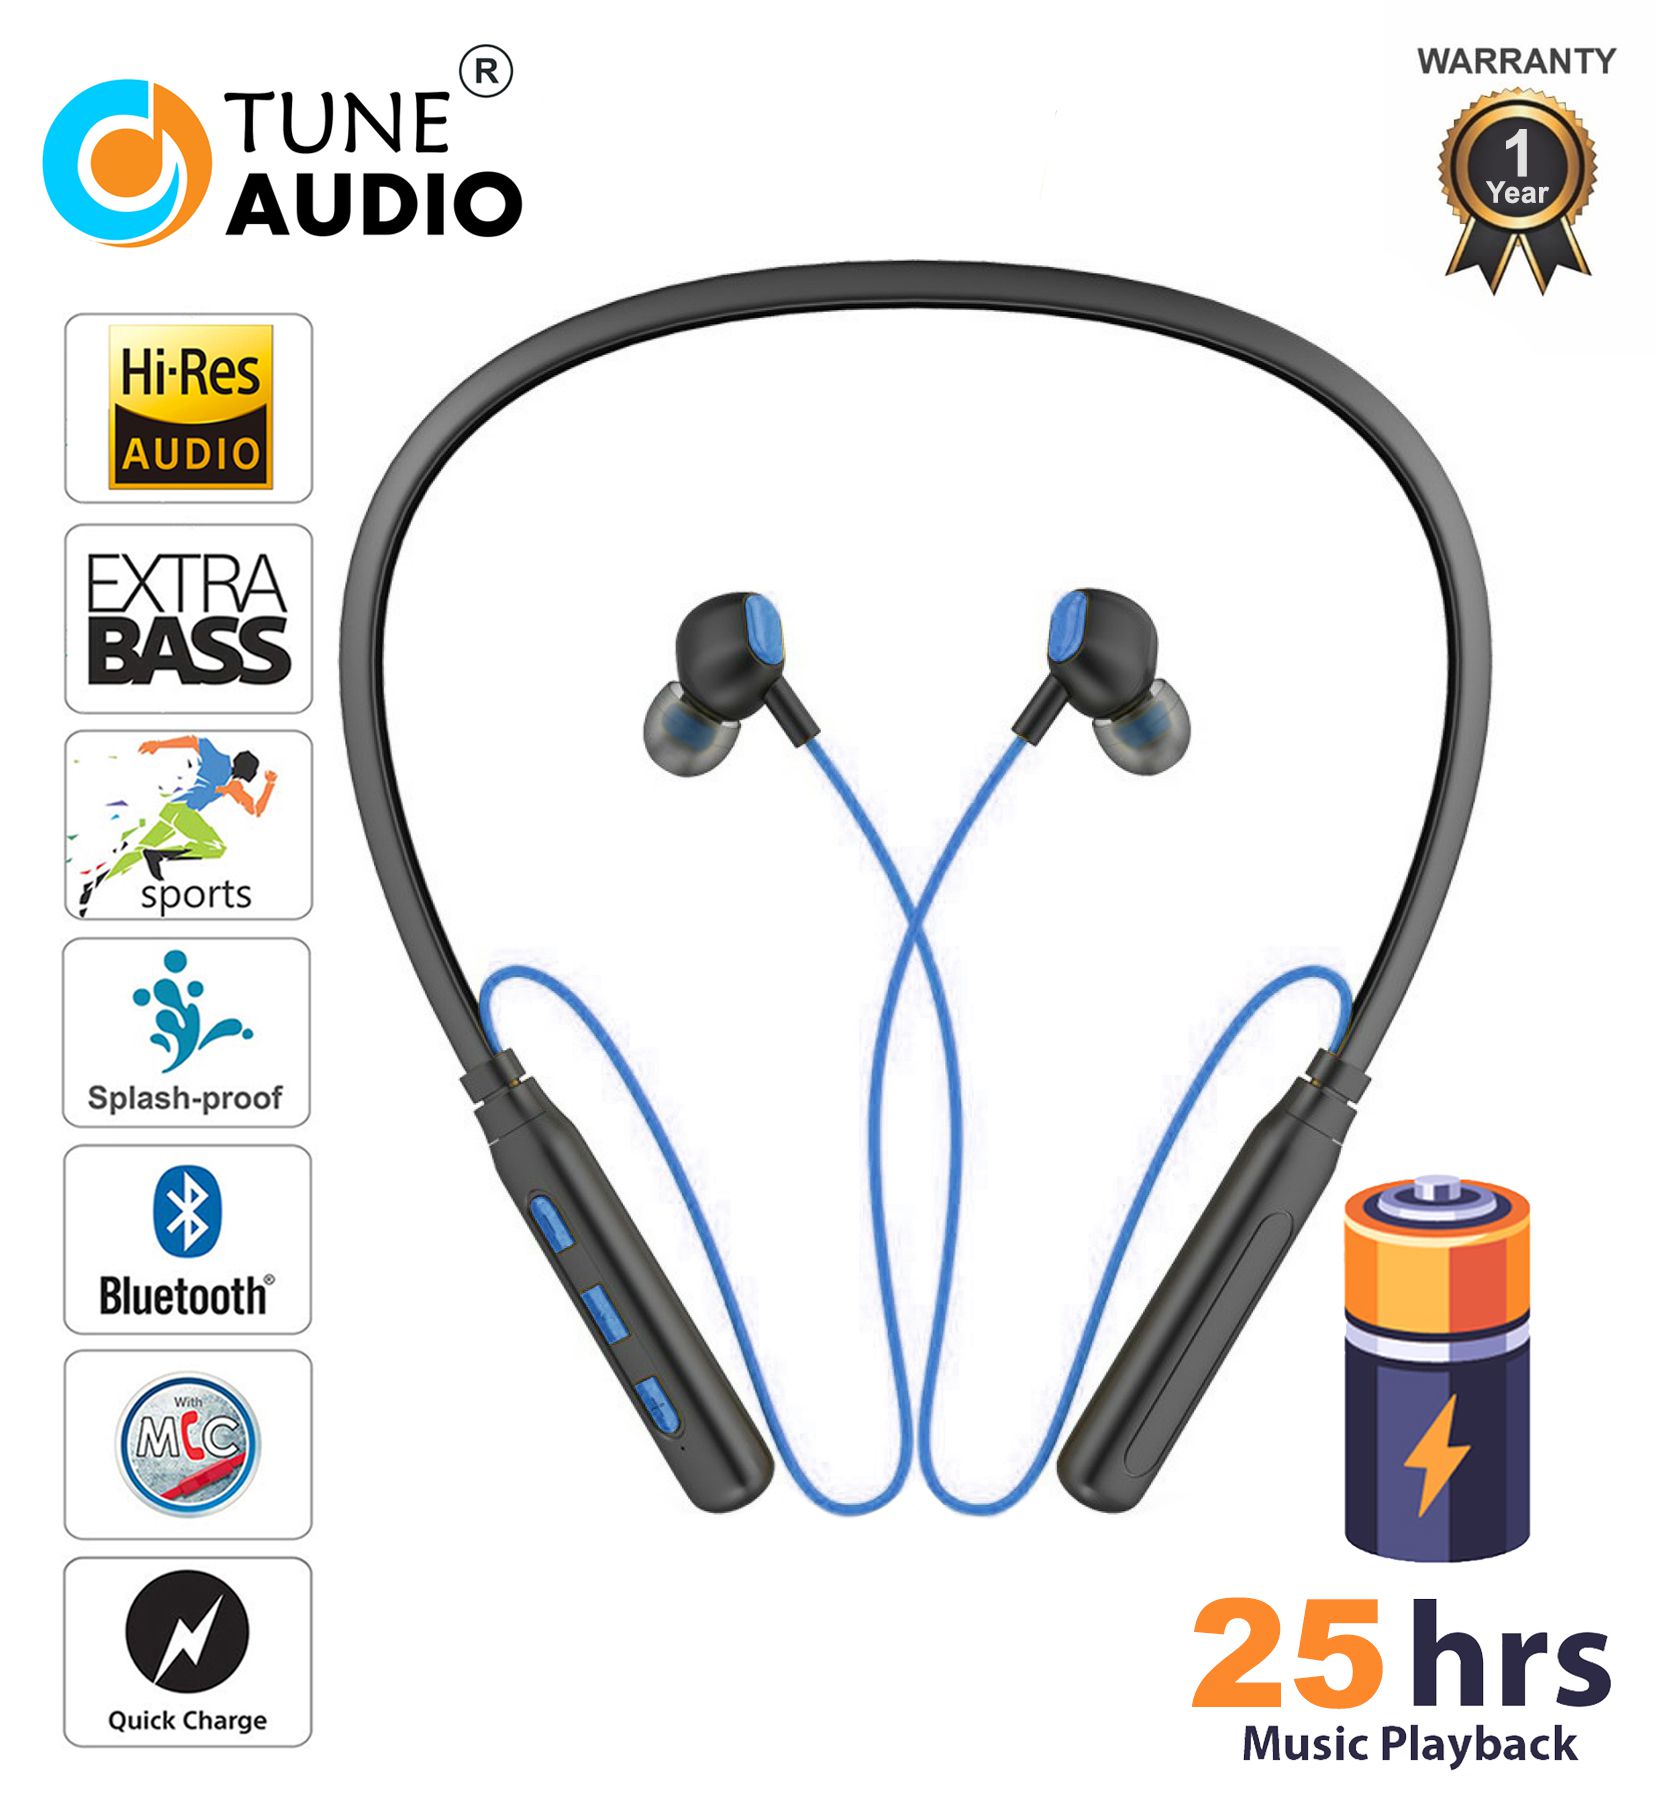 TUNE AUDIO NEO 4D BASS 25 HOURS MUSIC PLAYBACK IPX4 4D SOUND EFFECT SPORT Bluetooth headphone / Bluetooth earphone Magnetic, NECKBAND, HEADPHONE, FOR TUNE AUDIO